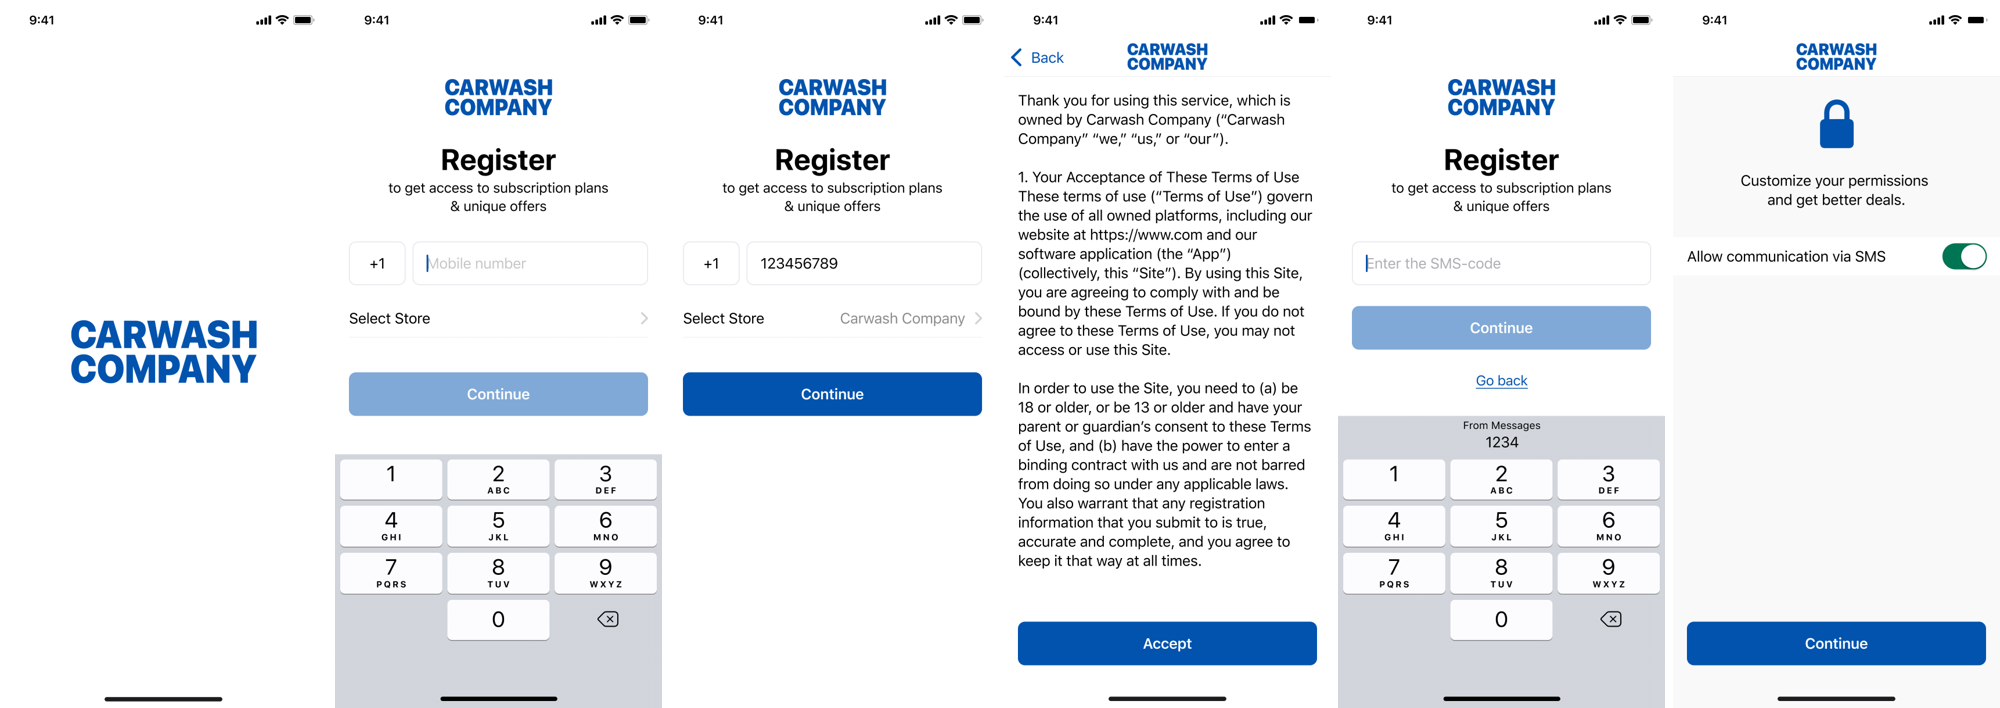 Carwash company register with the app